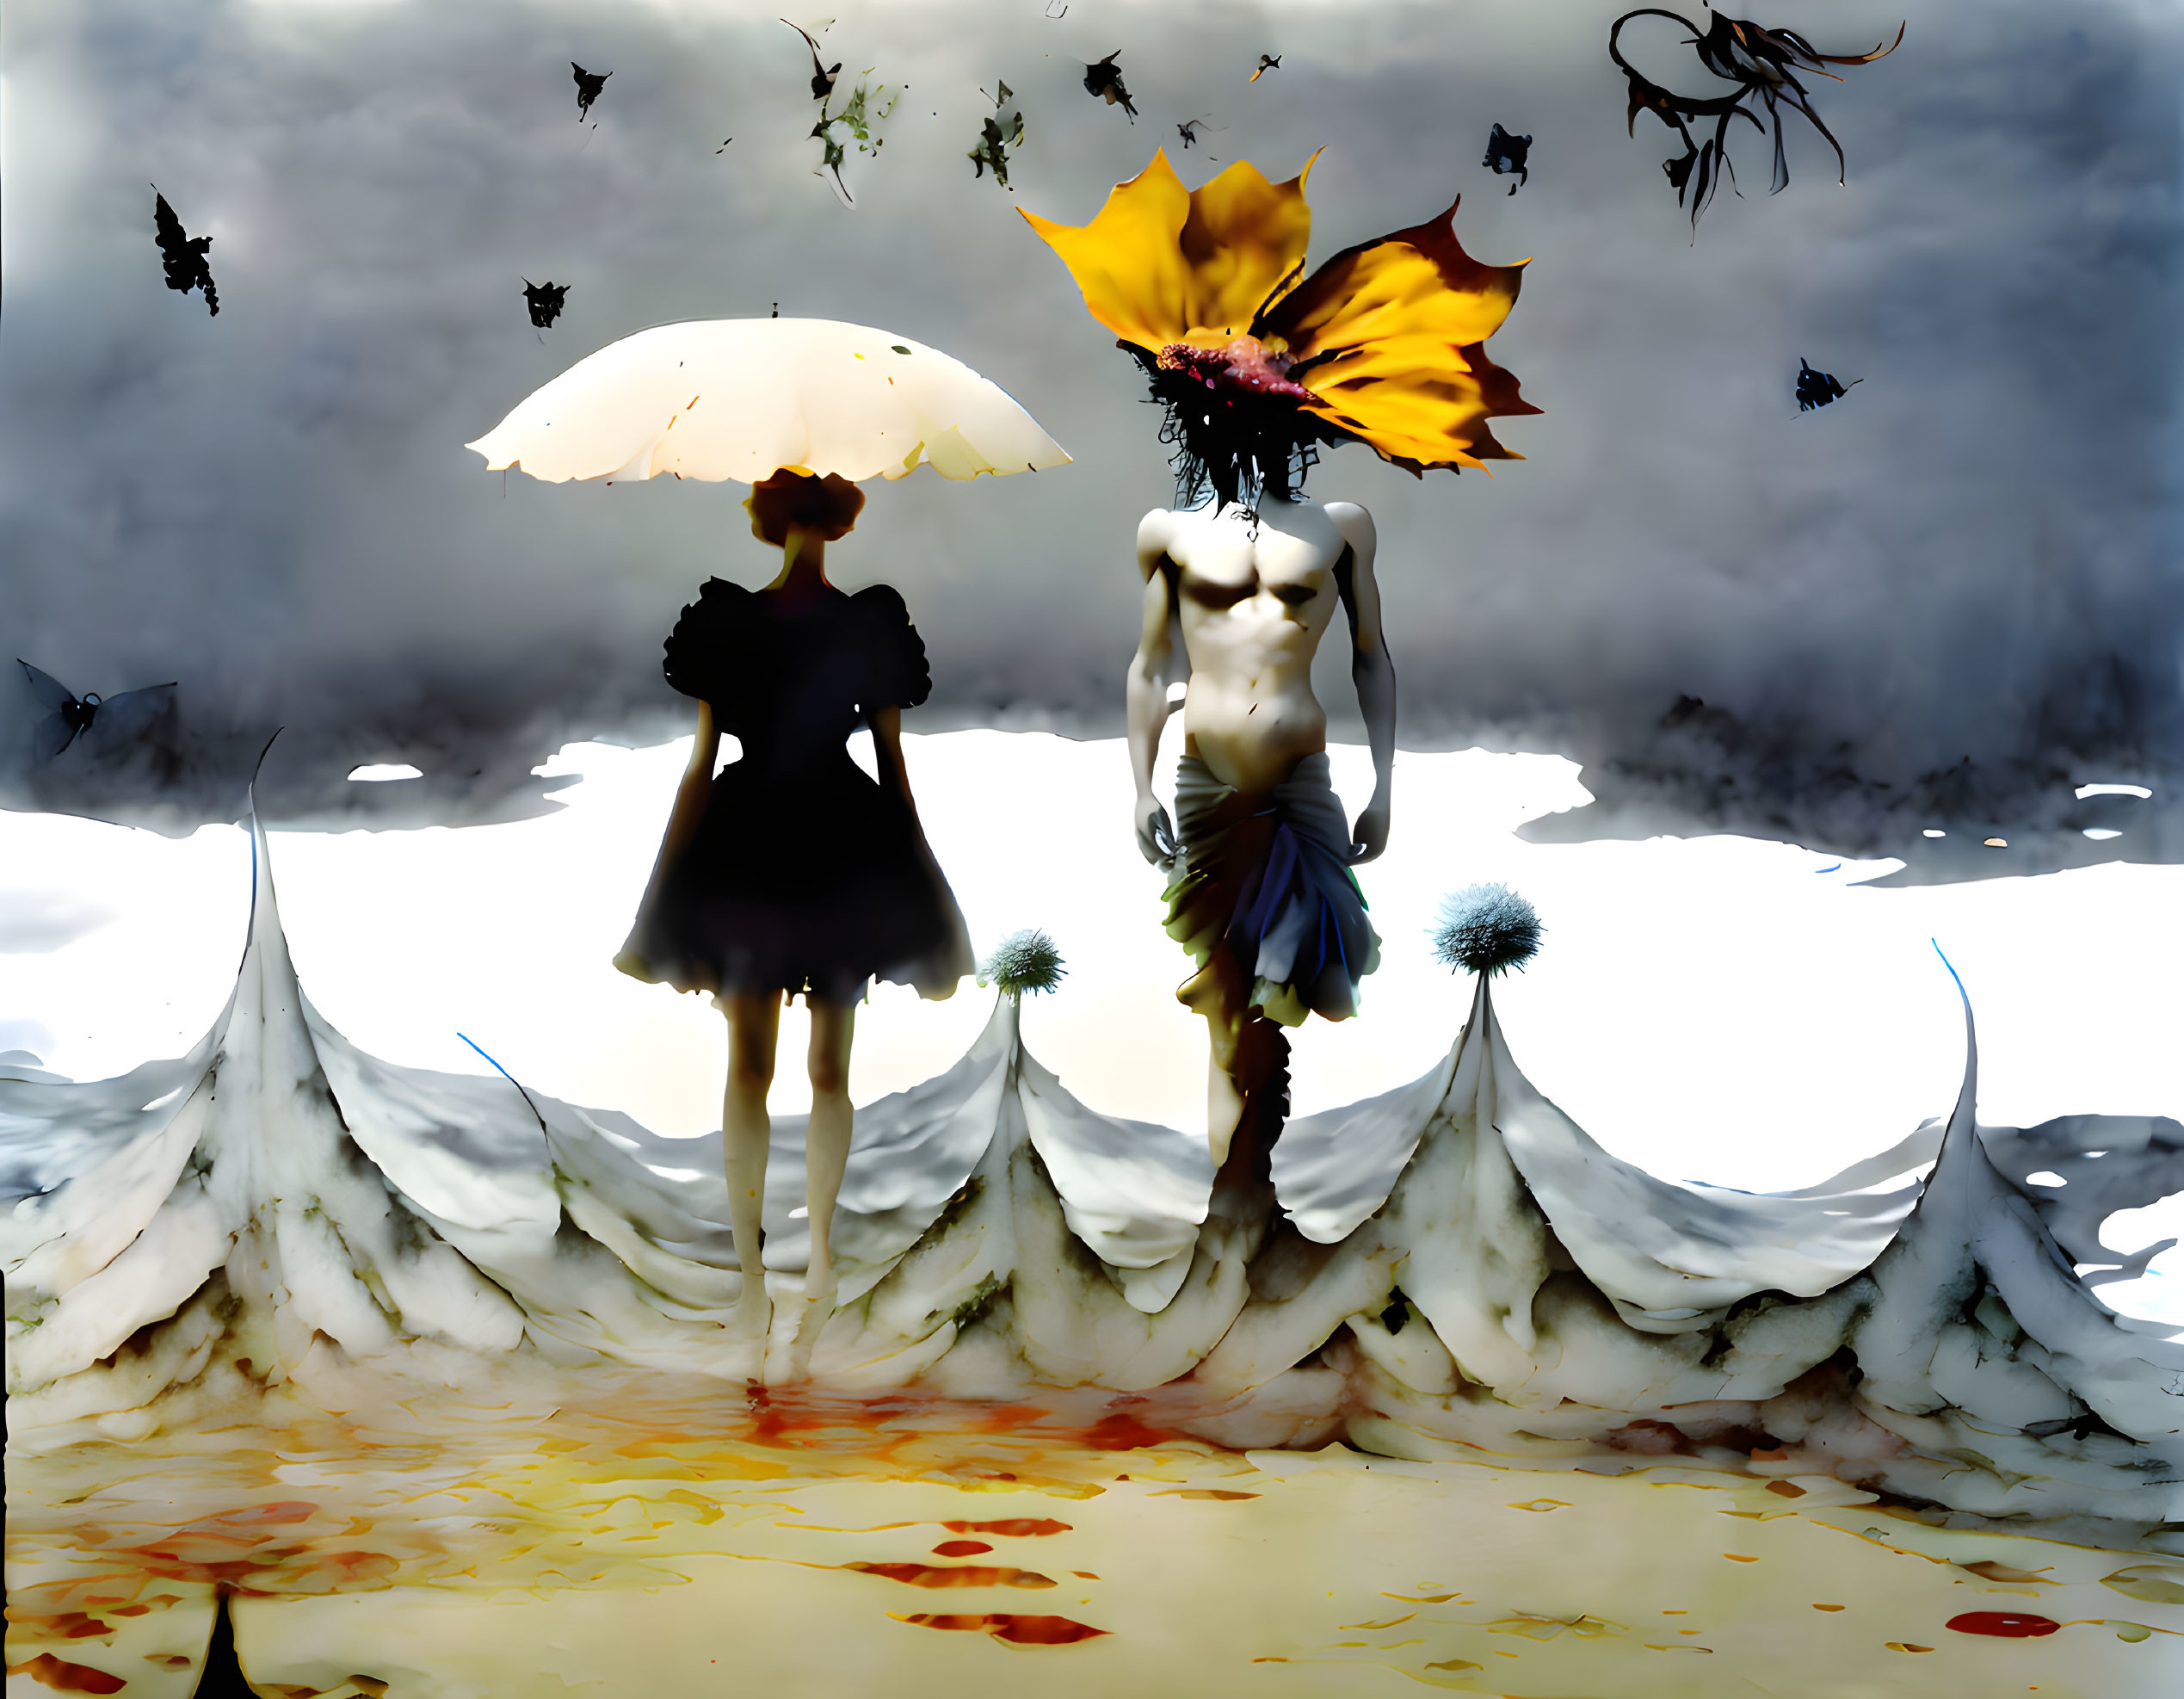 Surreal artwork: Two figures with umbrella and flower head in dreamy landscape